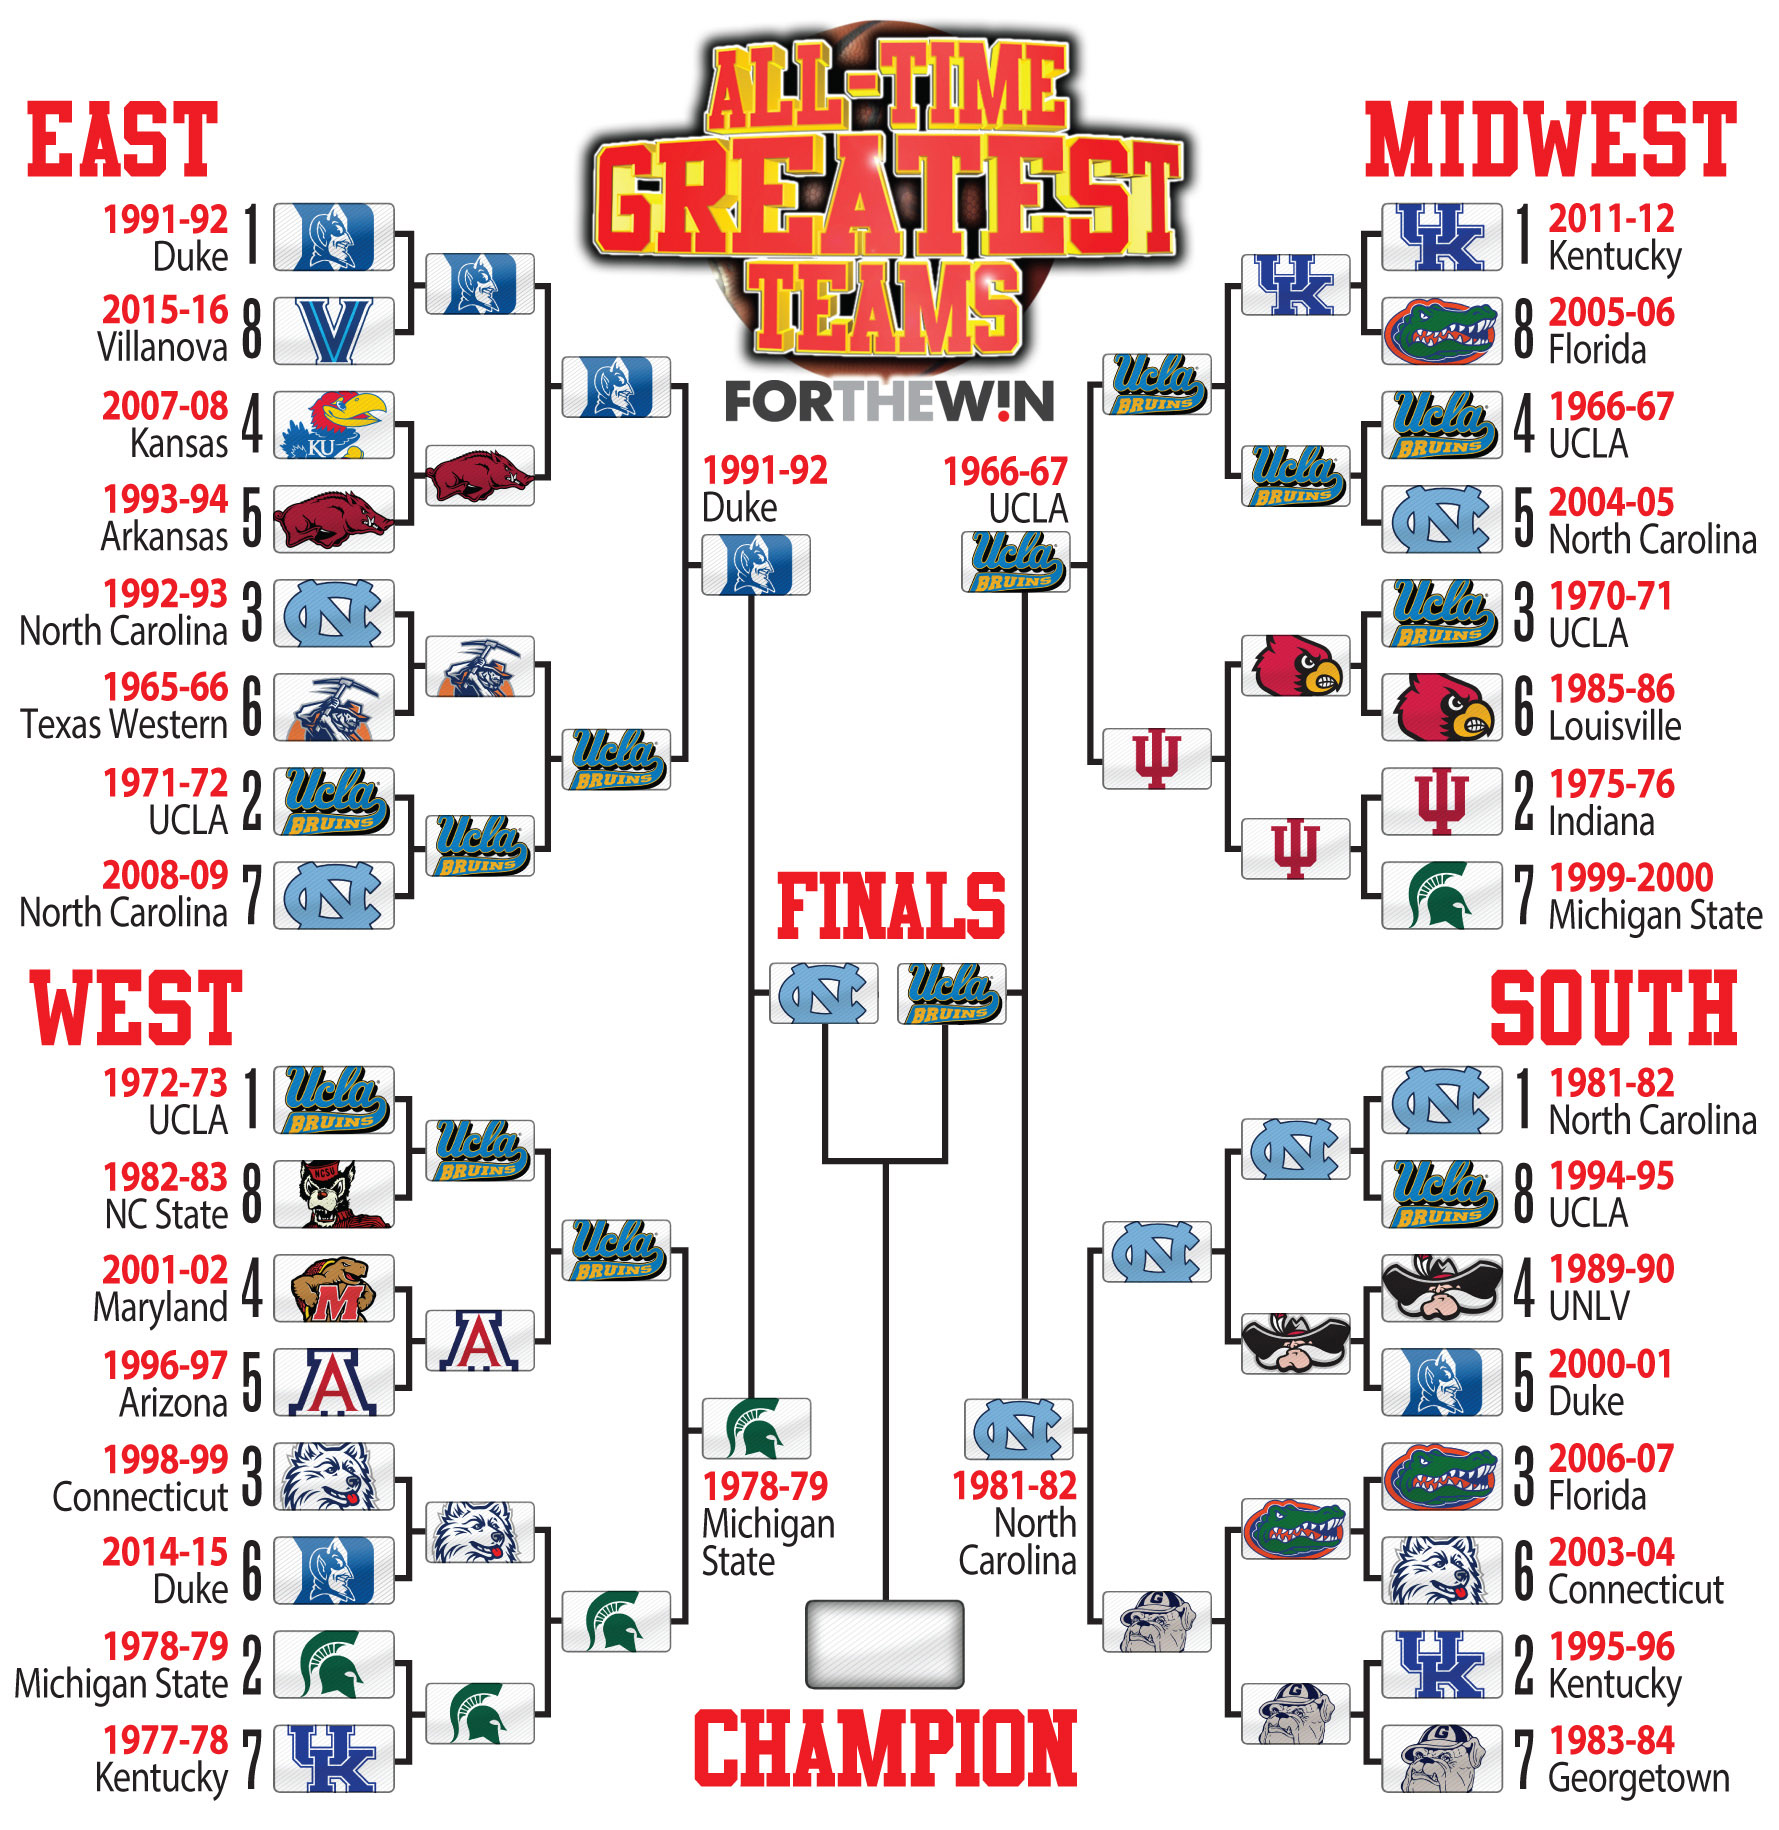 Bracket Madness The greatest NCAA tournament team of alltime Finals